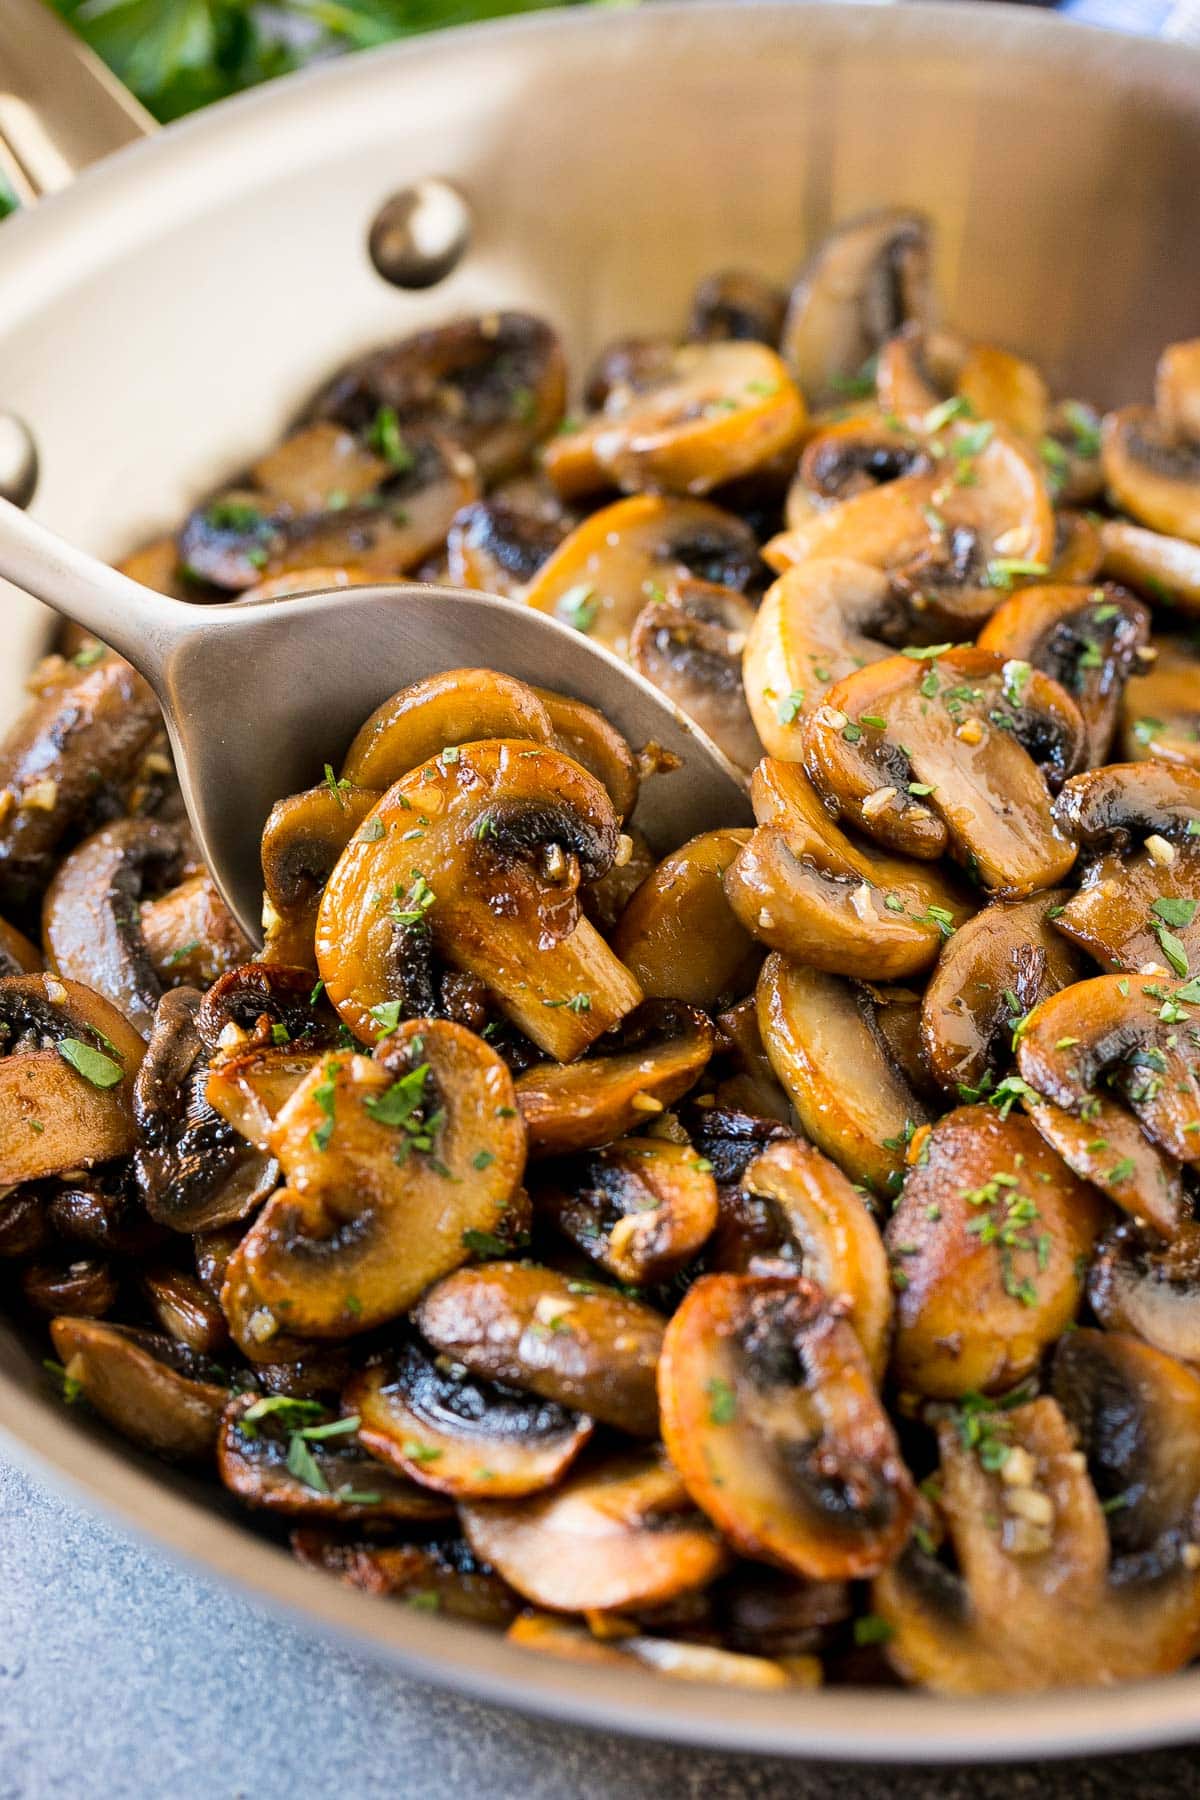 A pan of sauteed mushrooms with a serving spoon in it.